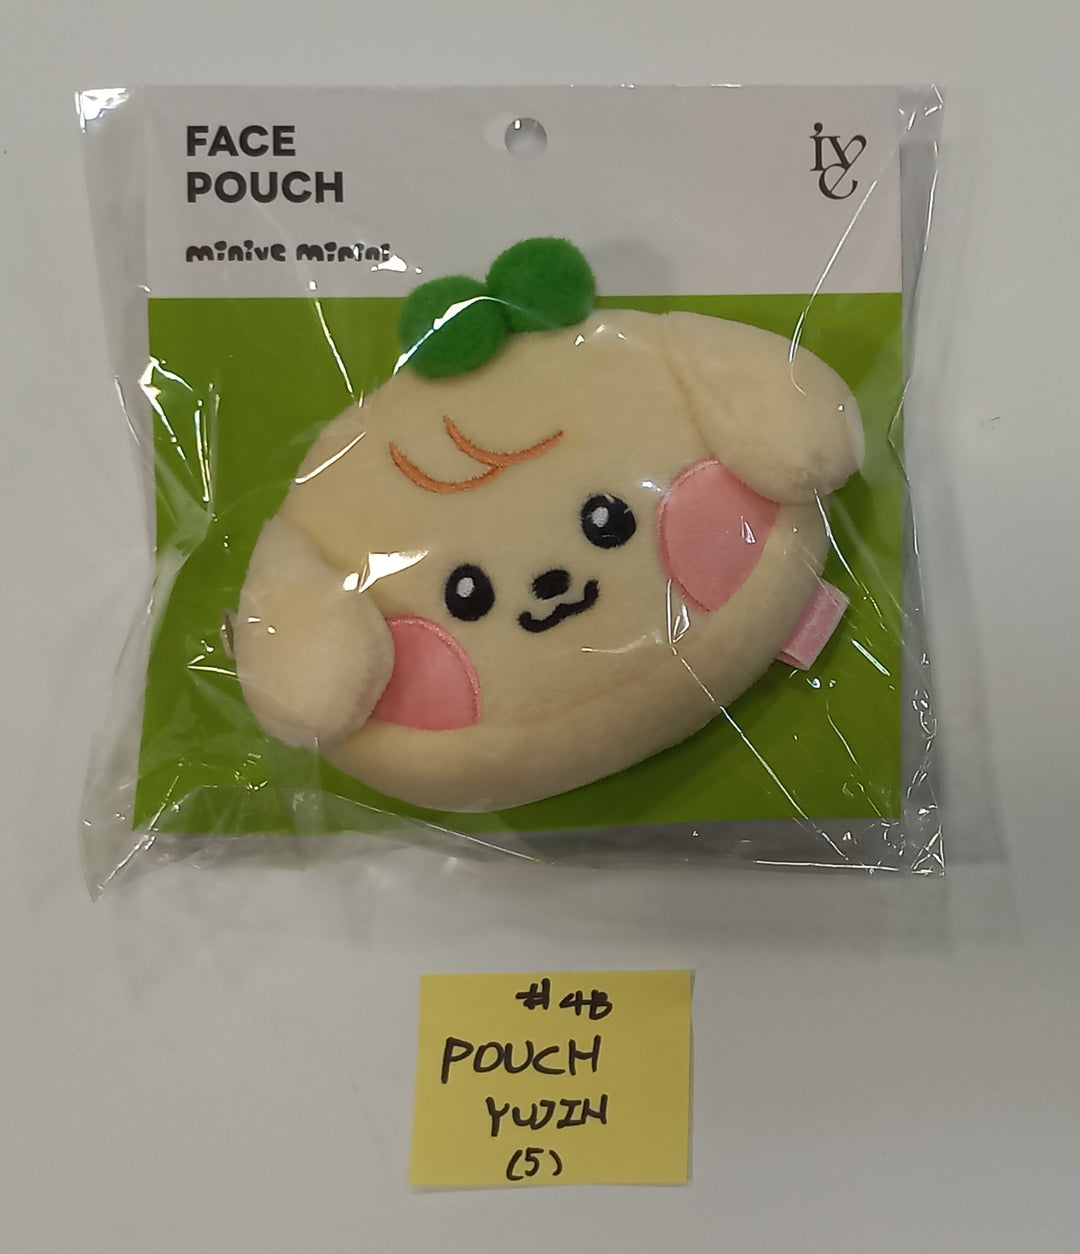 IVE "SWITCH" - Line Friends Gangnam Flagship Store Official MD [Plush keyring, Pouch, Flat Plush, Smarttok] [24.5.4]